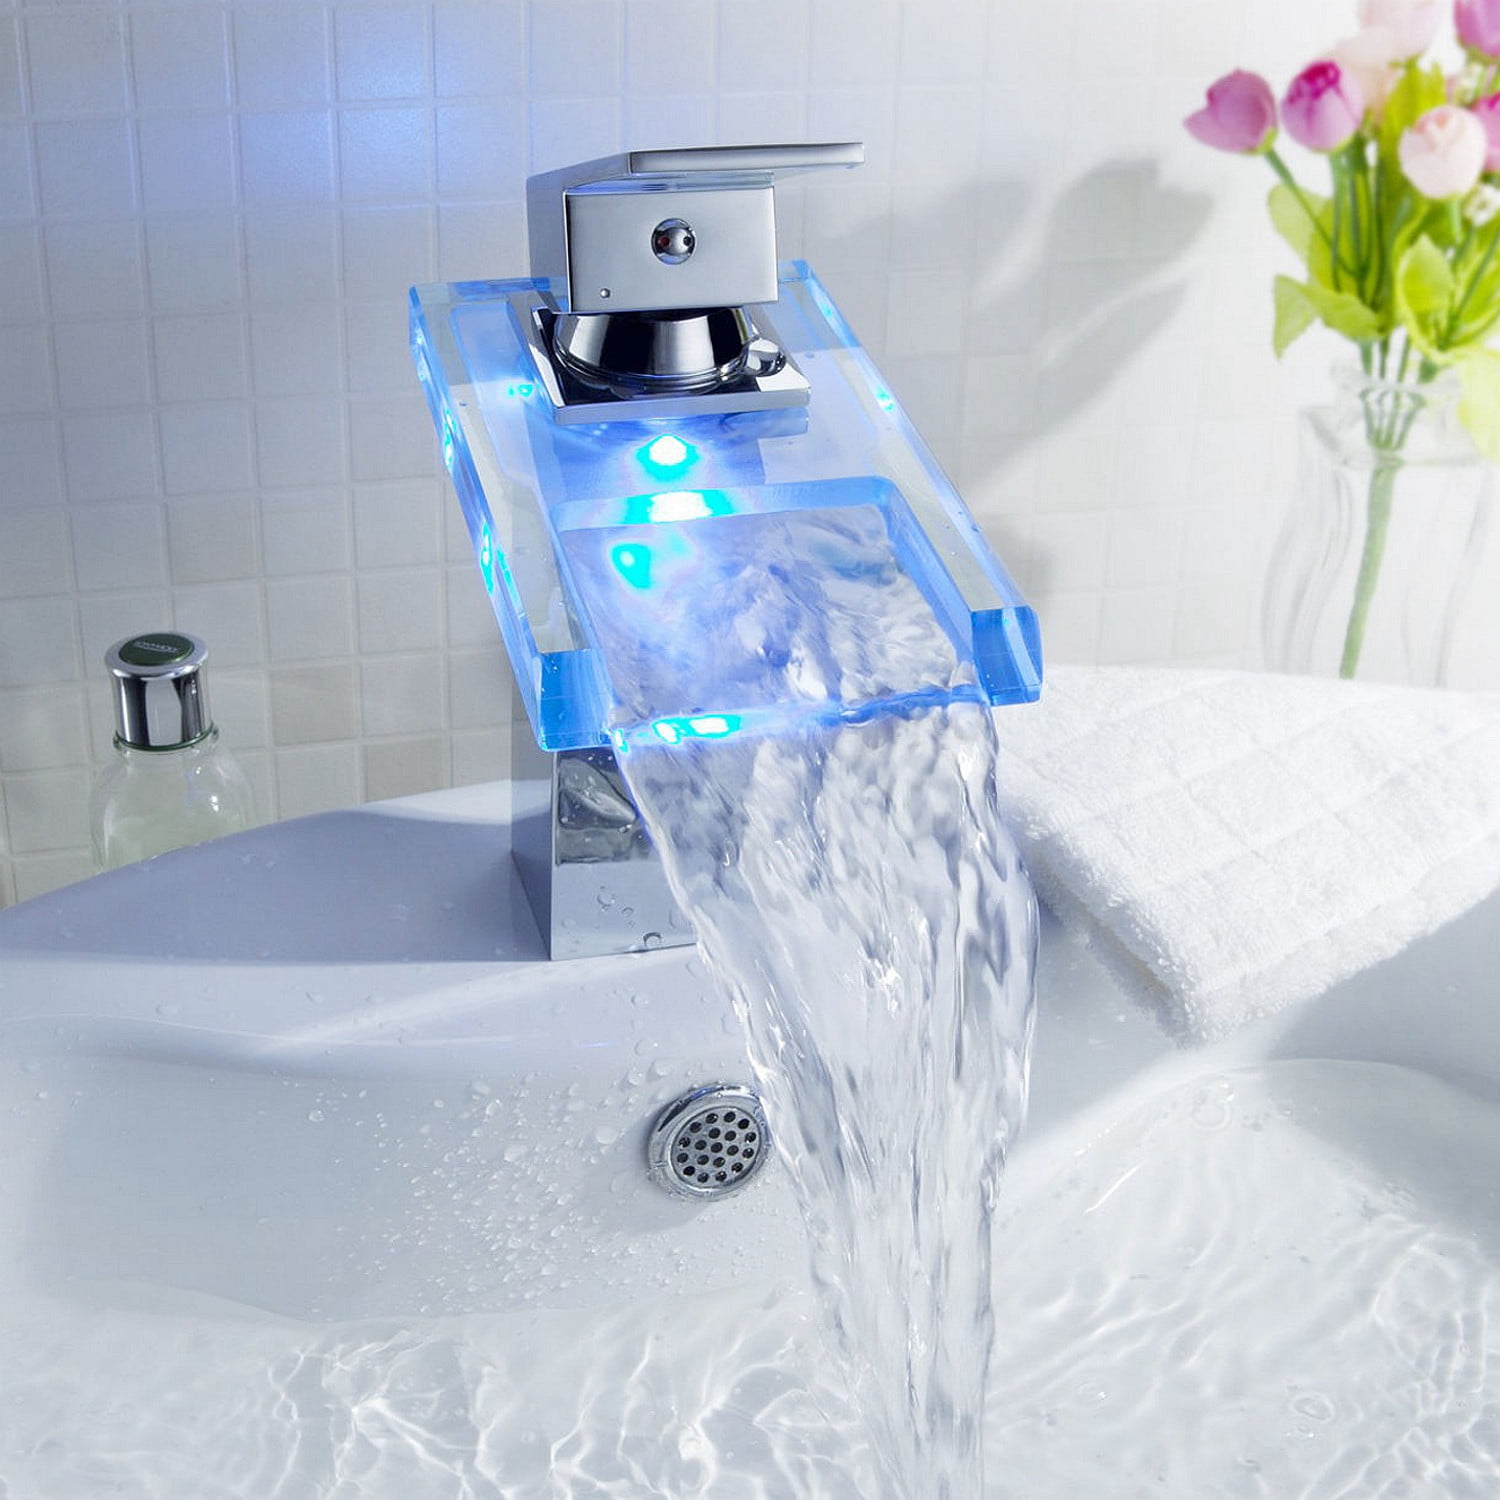 3 Colors LED Changing Waterfall Faucet Mixer Bathroom Basin Hot&Cold Tap 